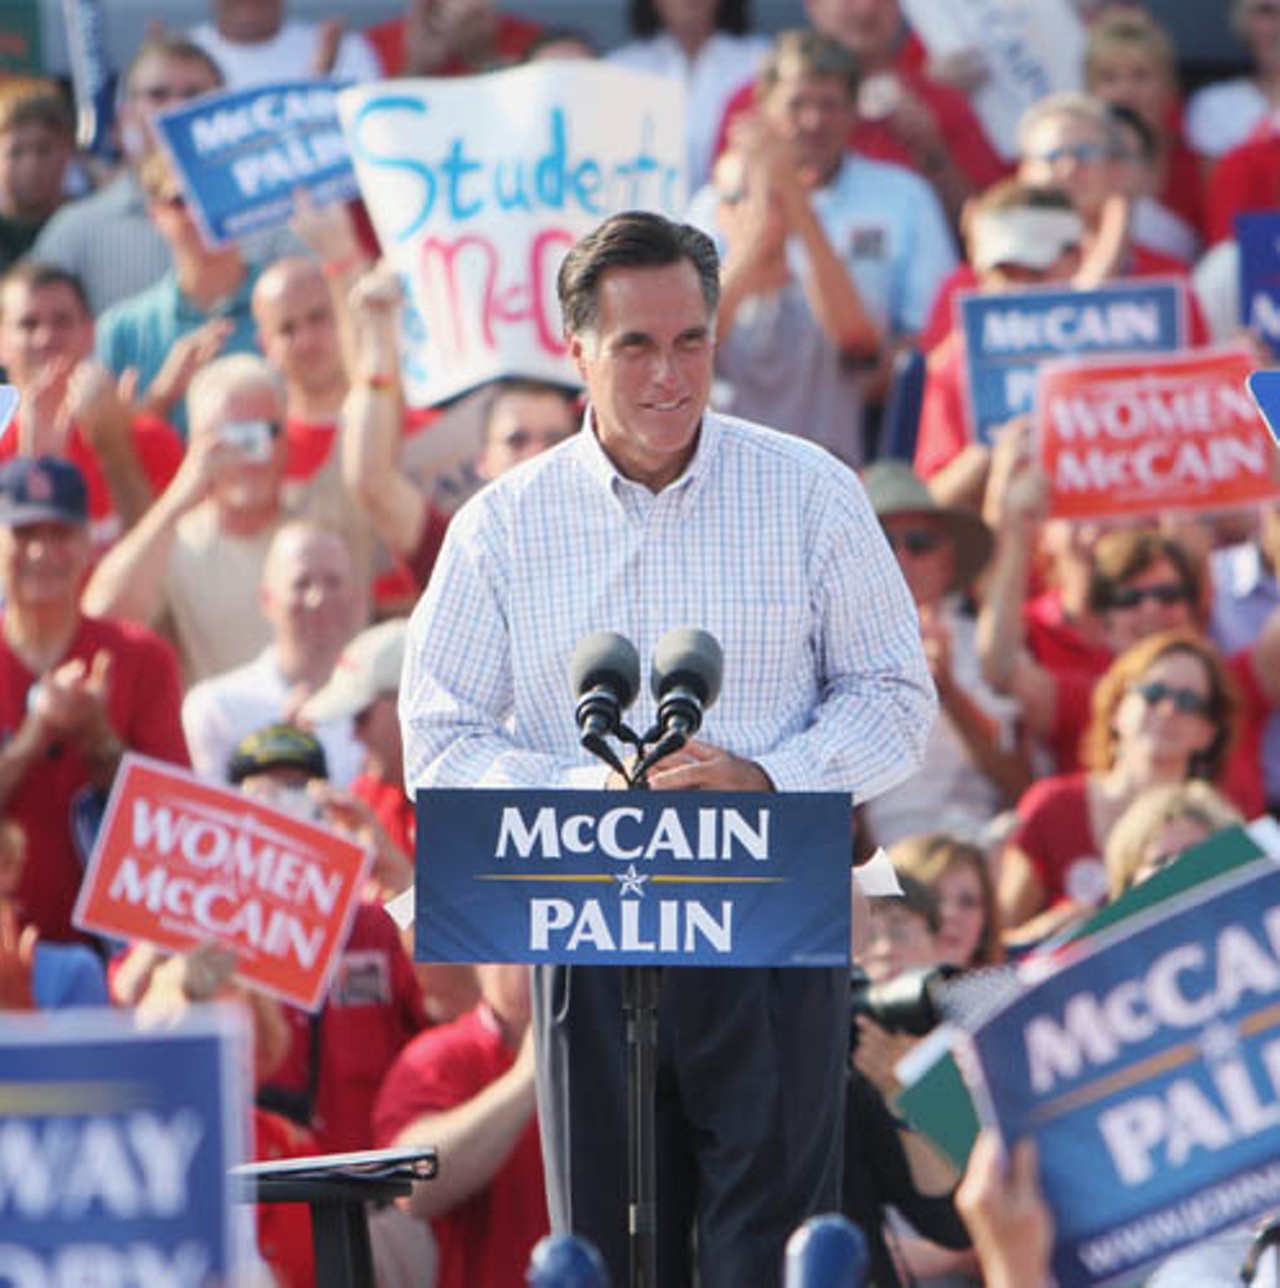 Former Massachusetts Governor Mitt Romney explains why to punch the McCain-Palin ticket.